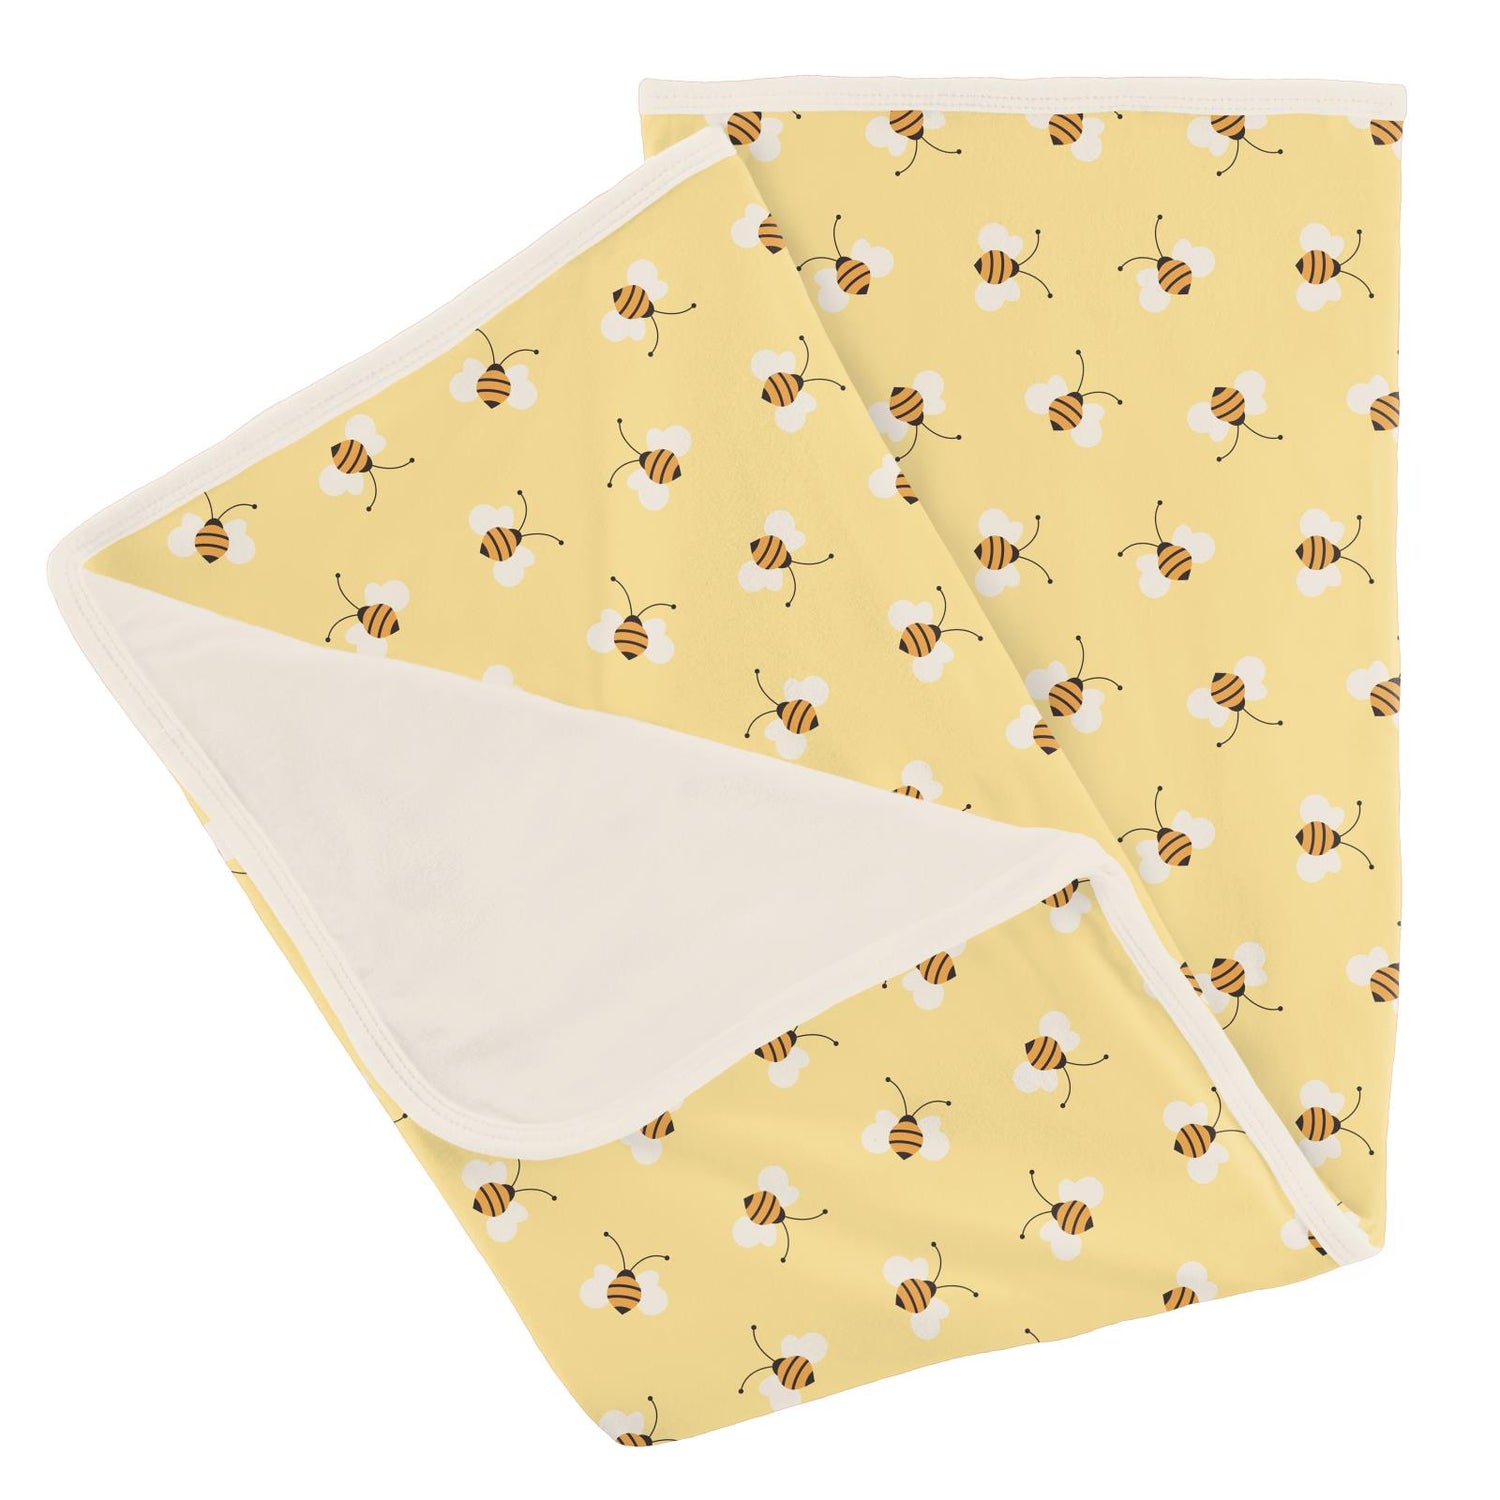 Print Stroller Blanket in Wallaby Bees